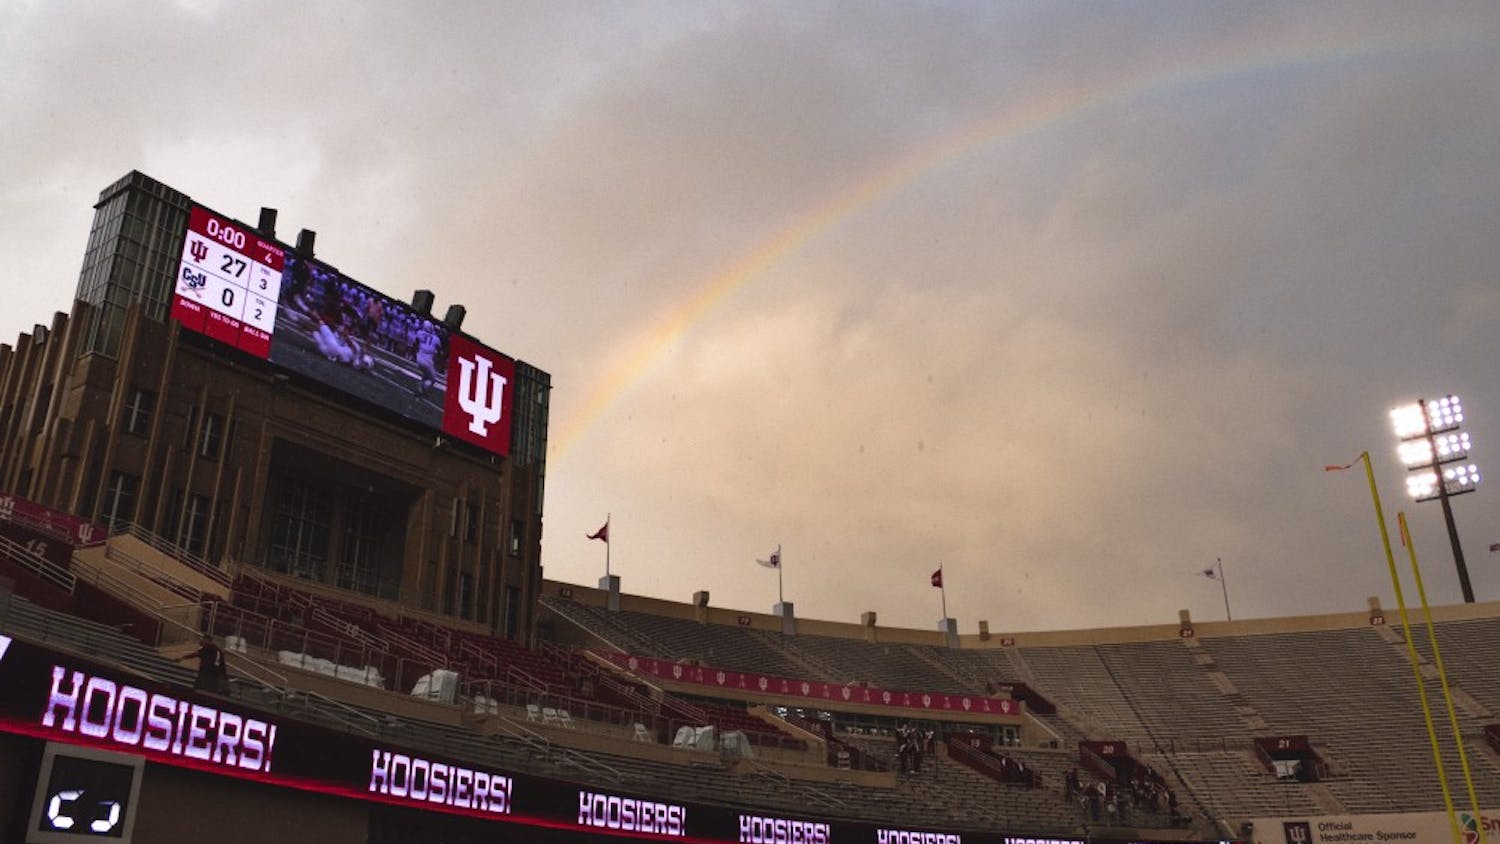 A rainbow stretches over Memorial Stadium after heavy rain during the game against Charleston Southern on Oct. 7, 2017. IU opens the season at home Saturday night against Virginia.&nbsp;